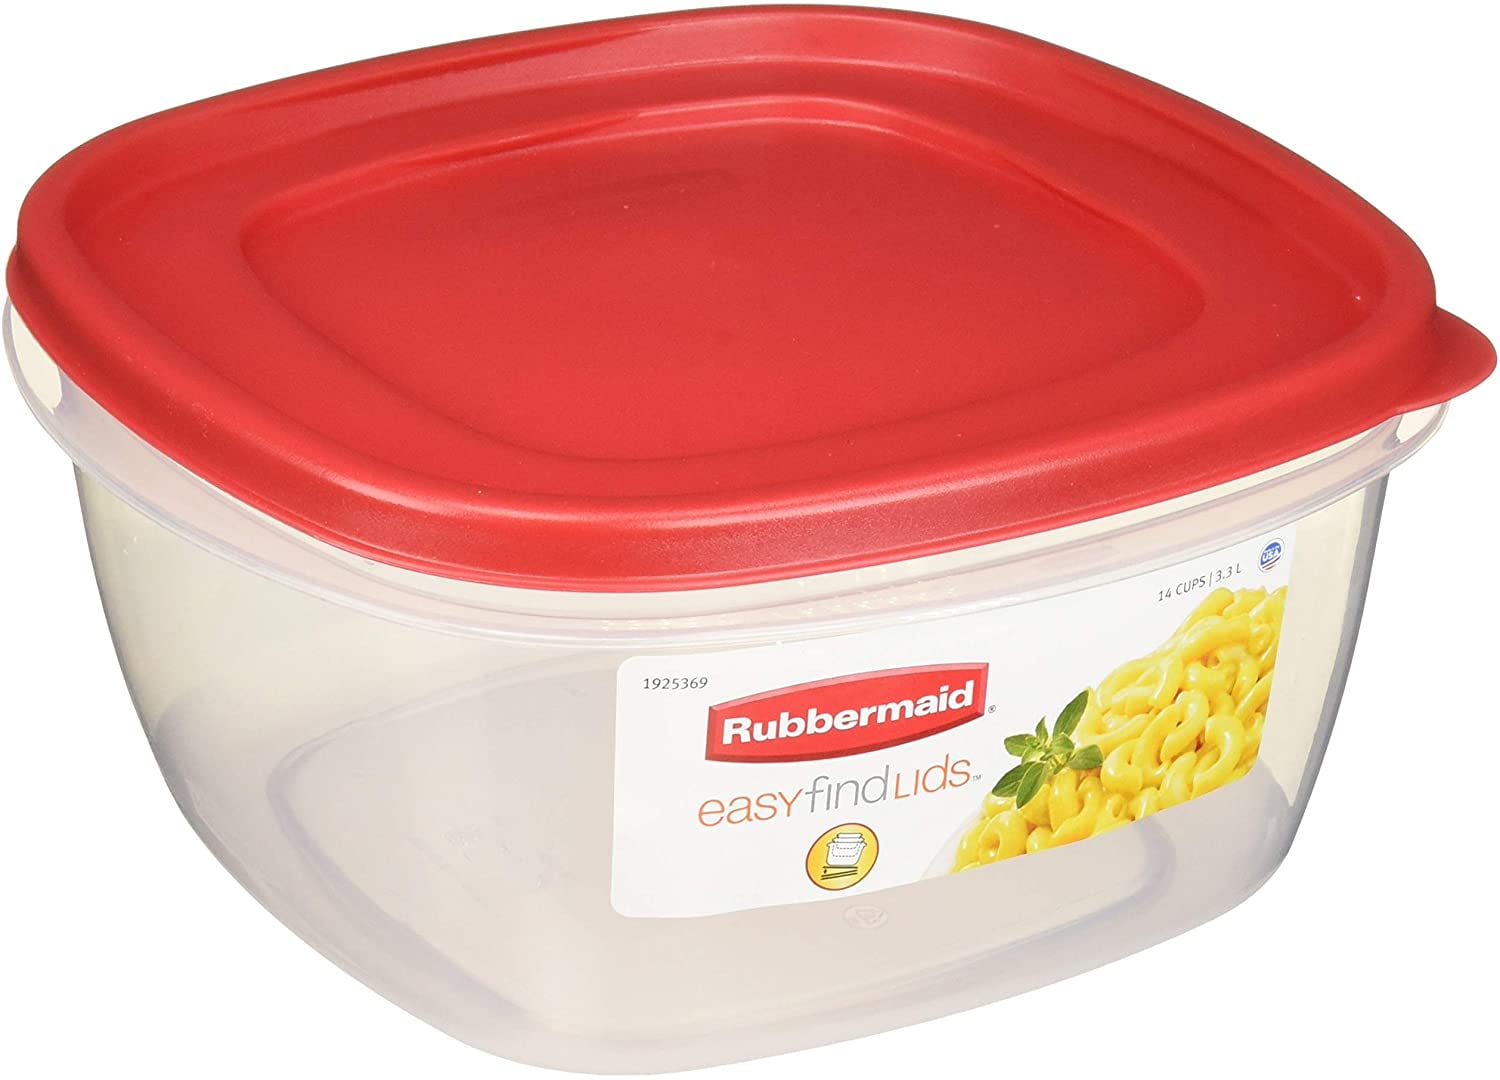 Rubbermaid Easy Find Lids Food Storage Container, 14 Cup